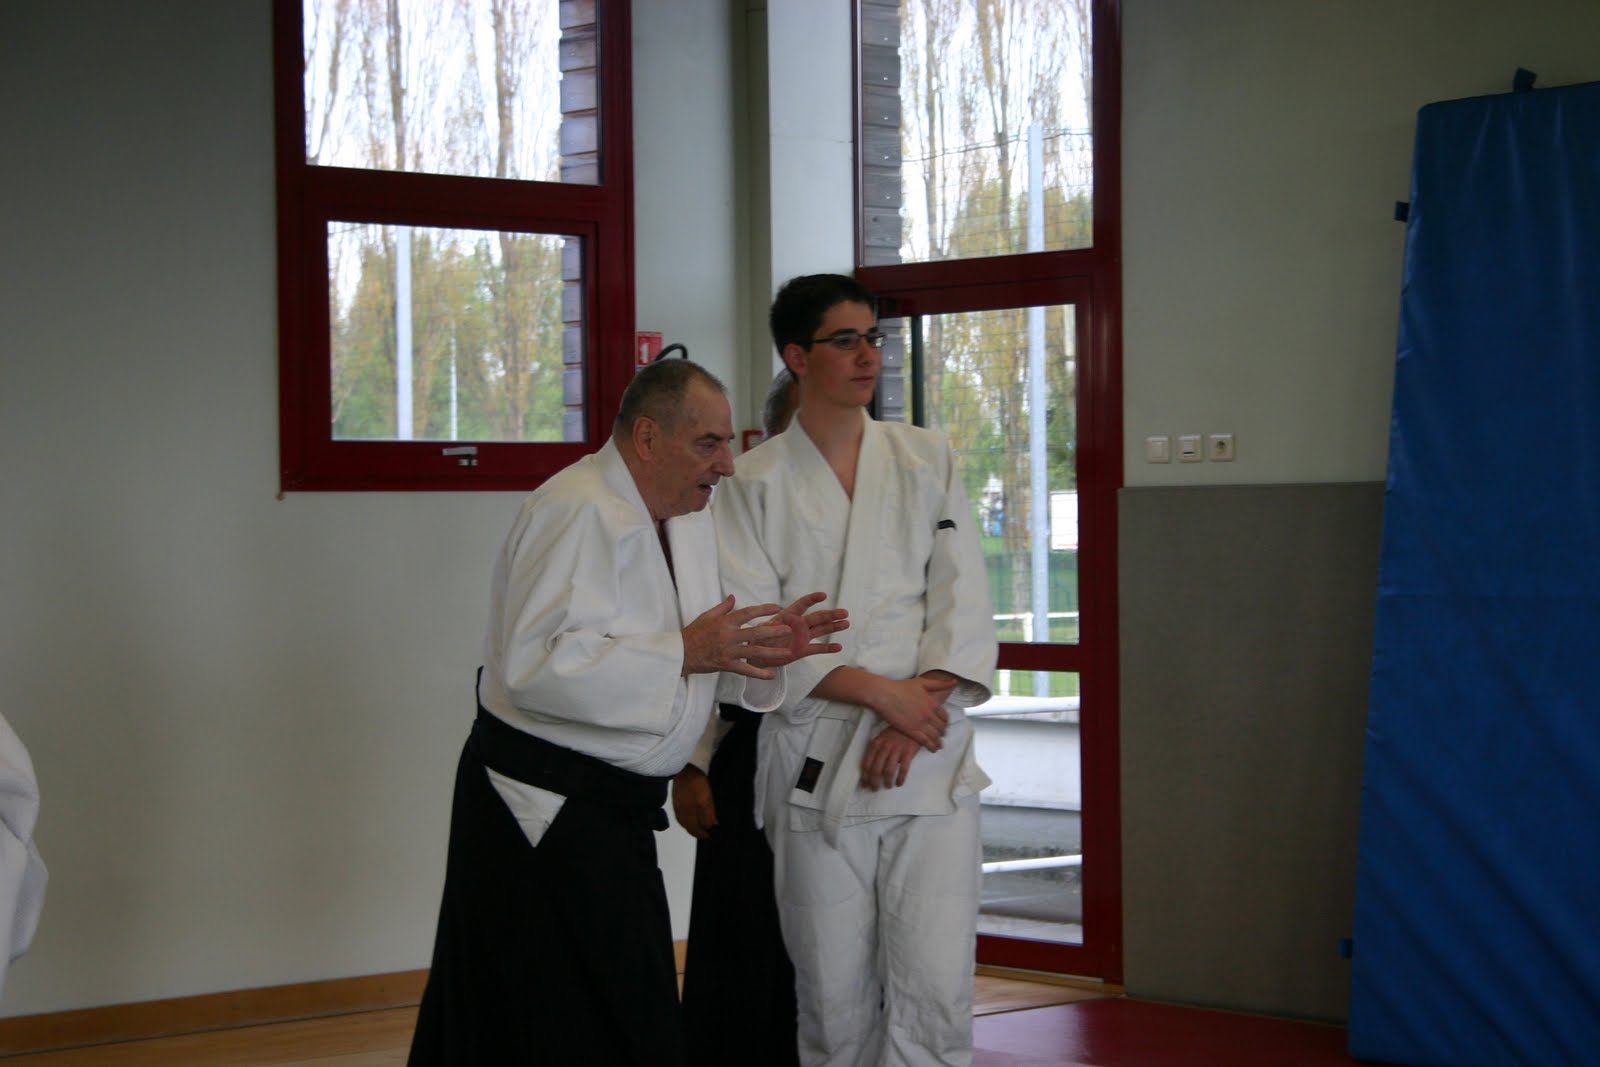 club aikido aulnay sous bois